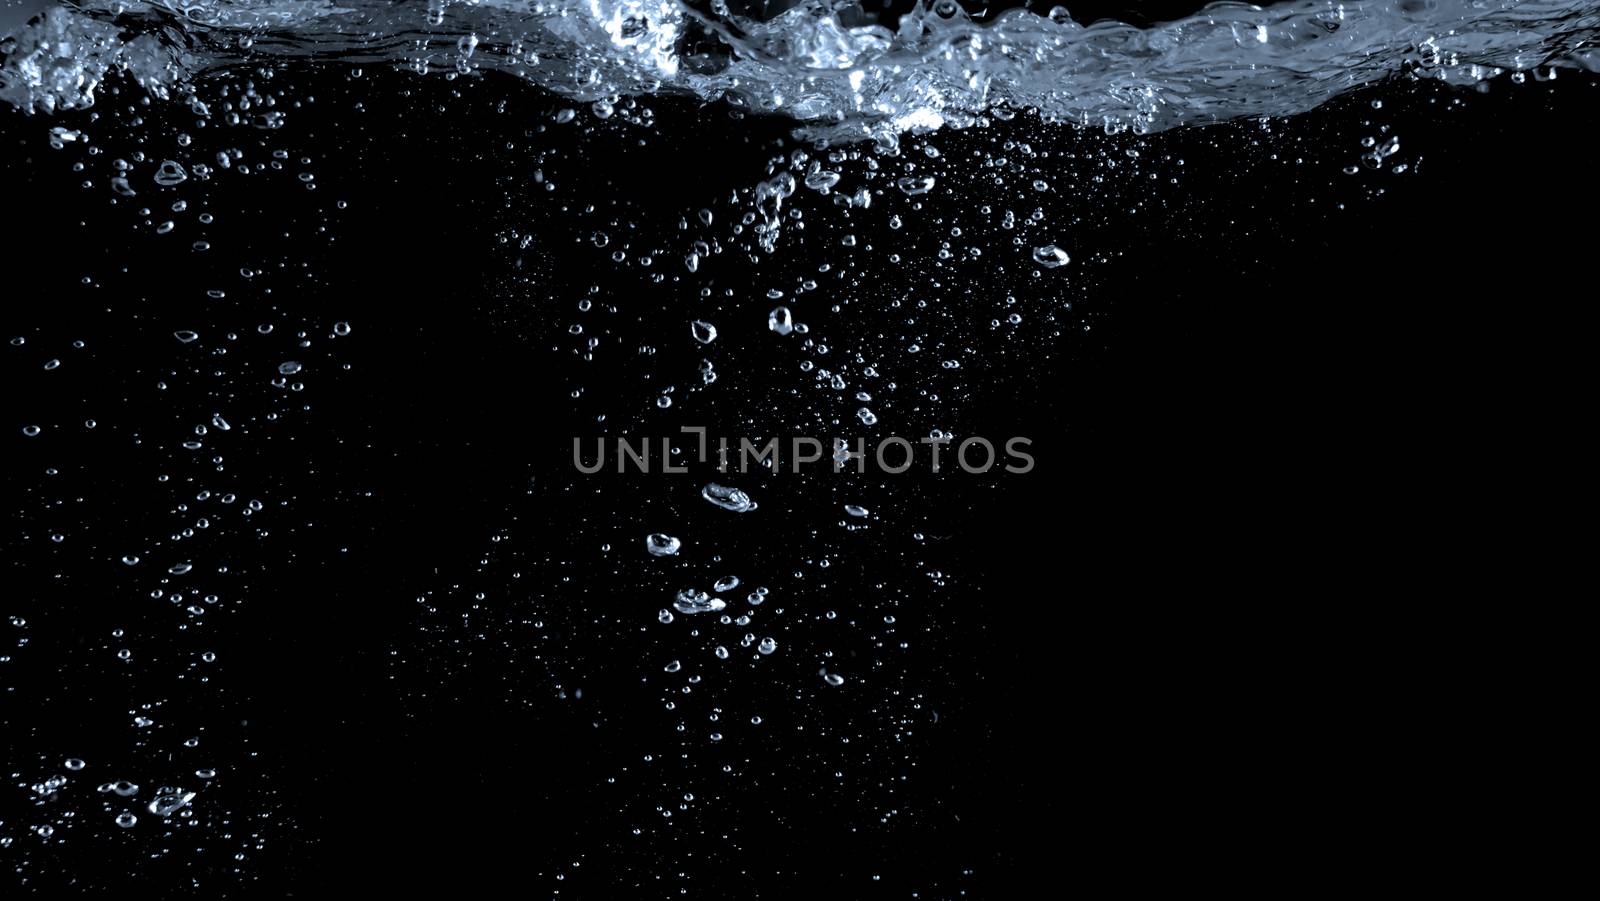 Blurry images of soda liquid water bubbles or carbonate drink or oil shape or beer fizzing or splashing and floating drop in black background for represent sparkling and refreshing